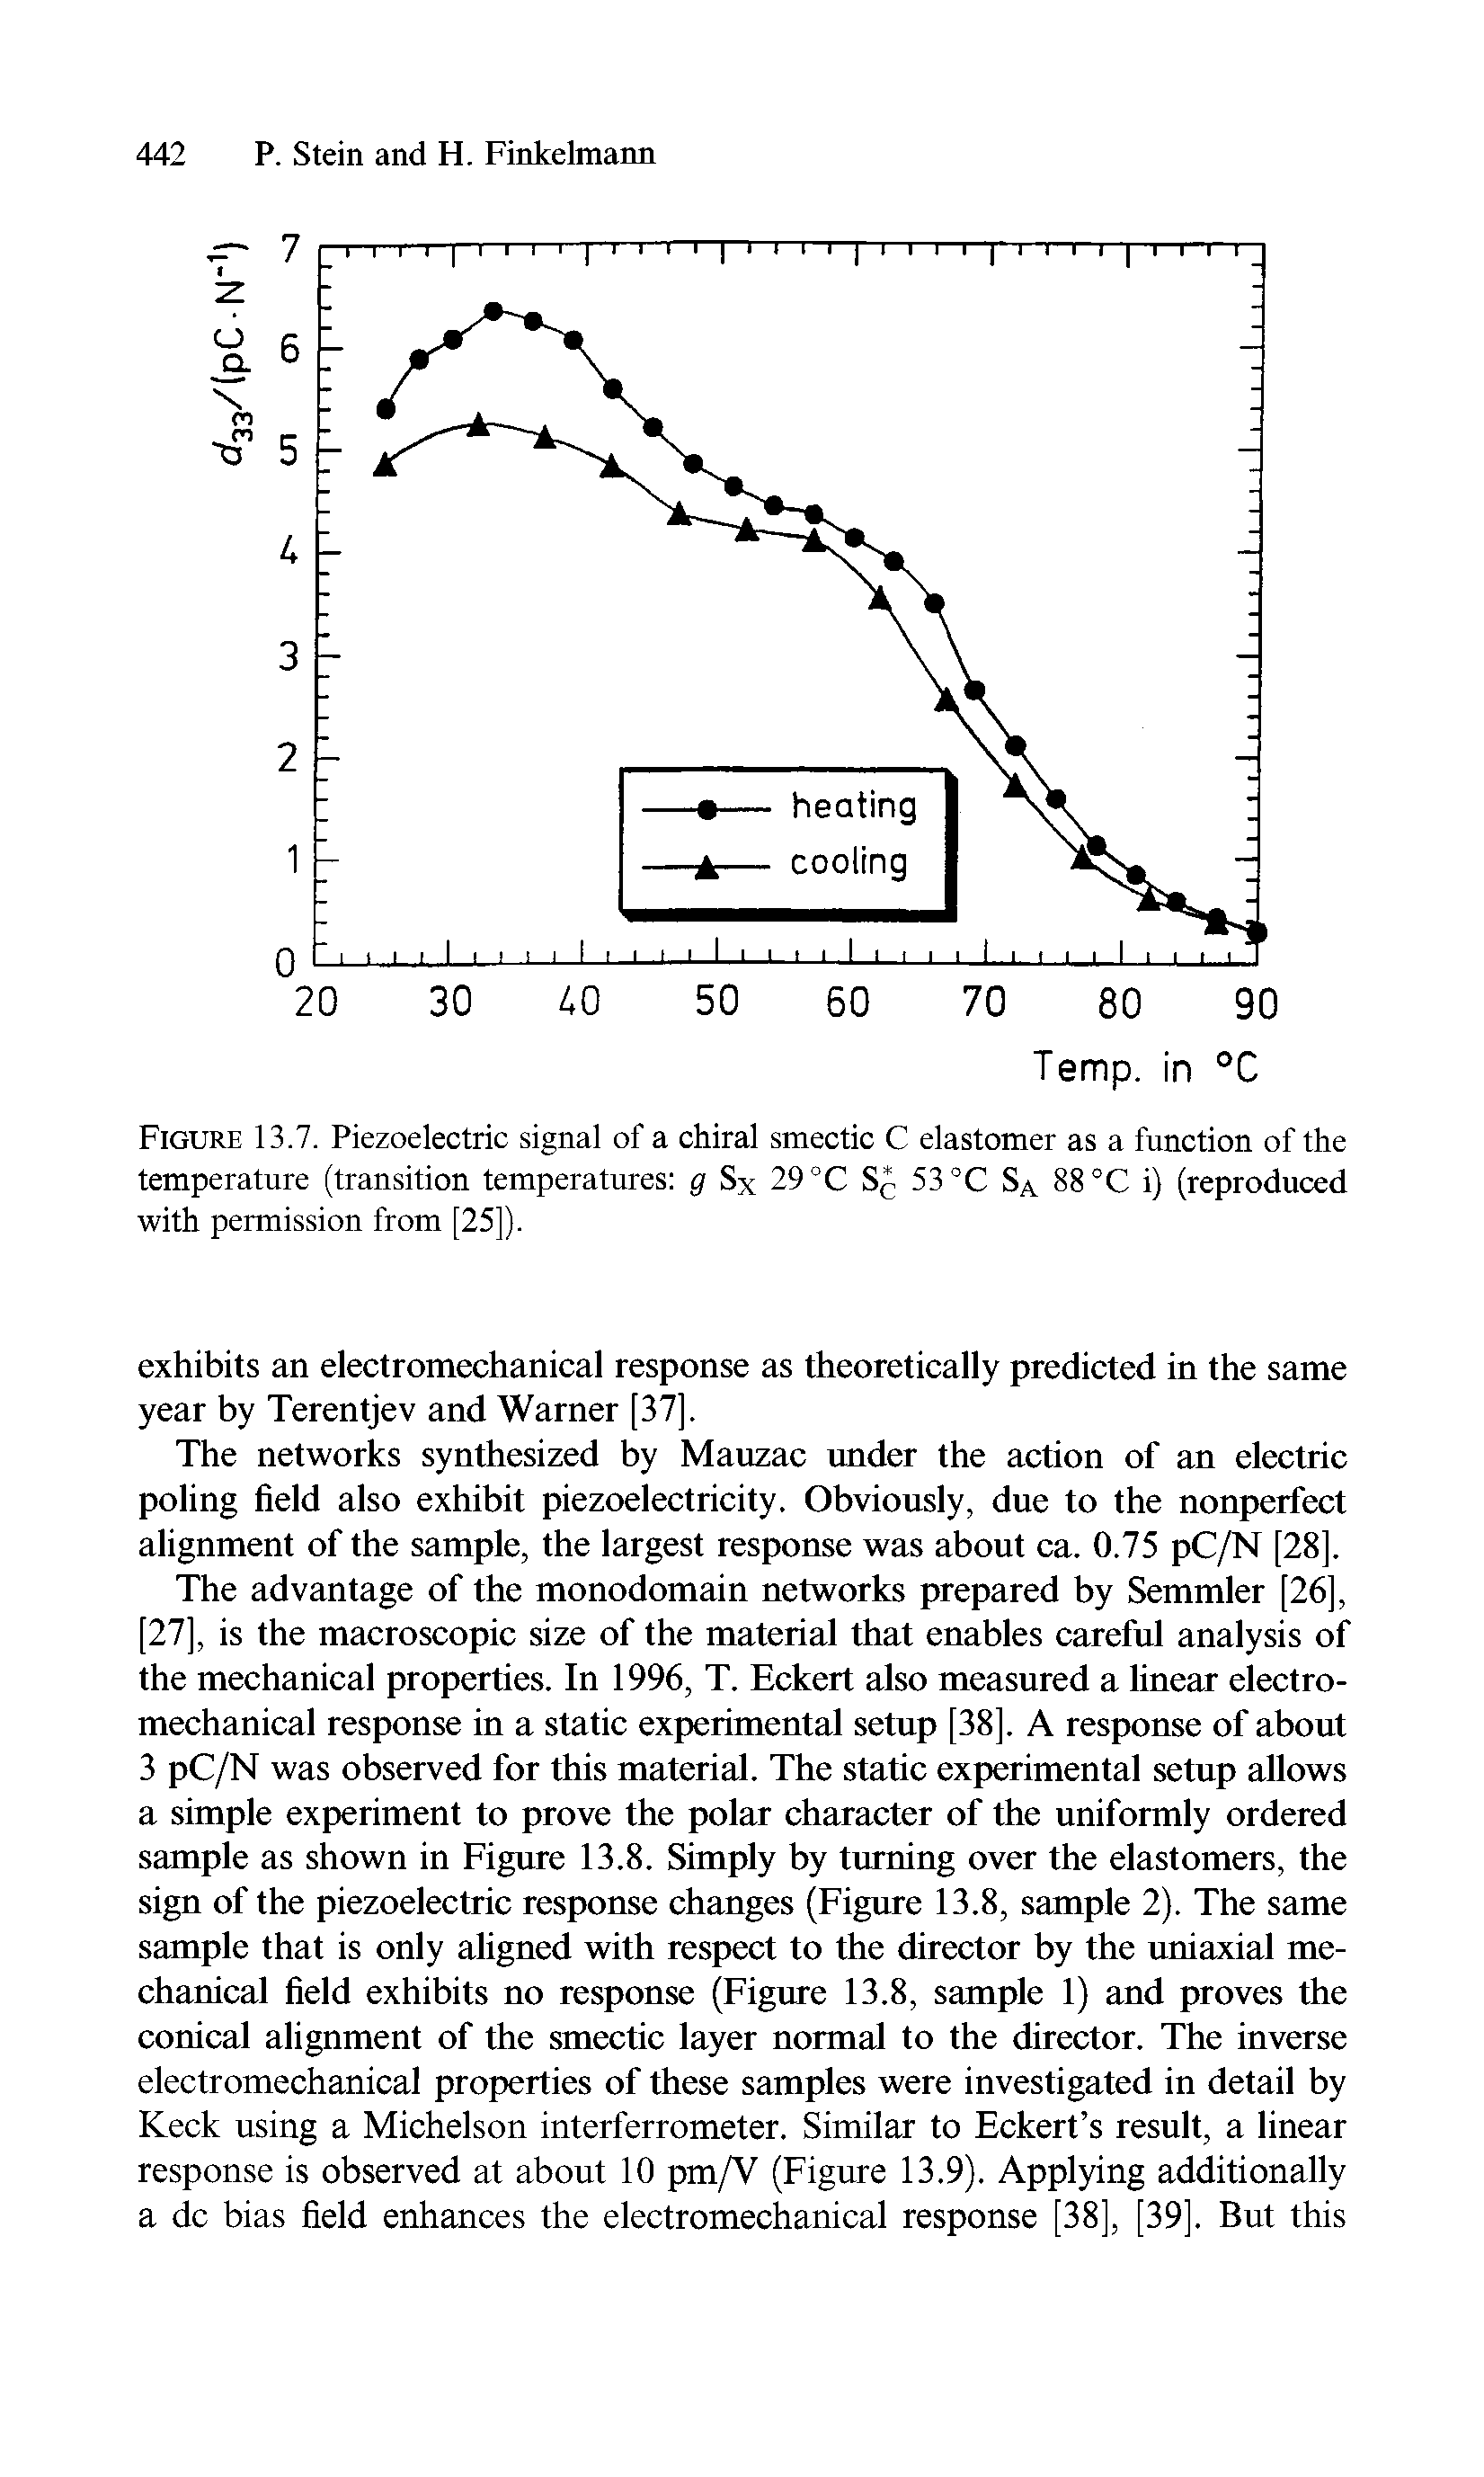 Figure 13.7. Piezoelectric signal of a chiral smectic C elastomer as a function of the temperature (transition temperatures g S 29 °C 53 °C Sa 88 °C i) (reproduced with permission from [25]).